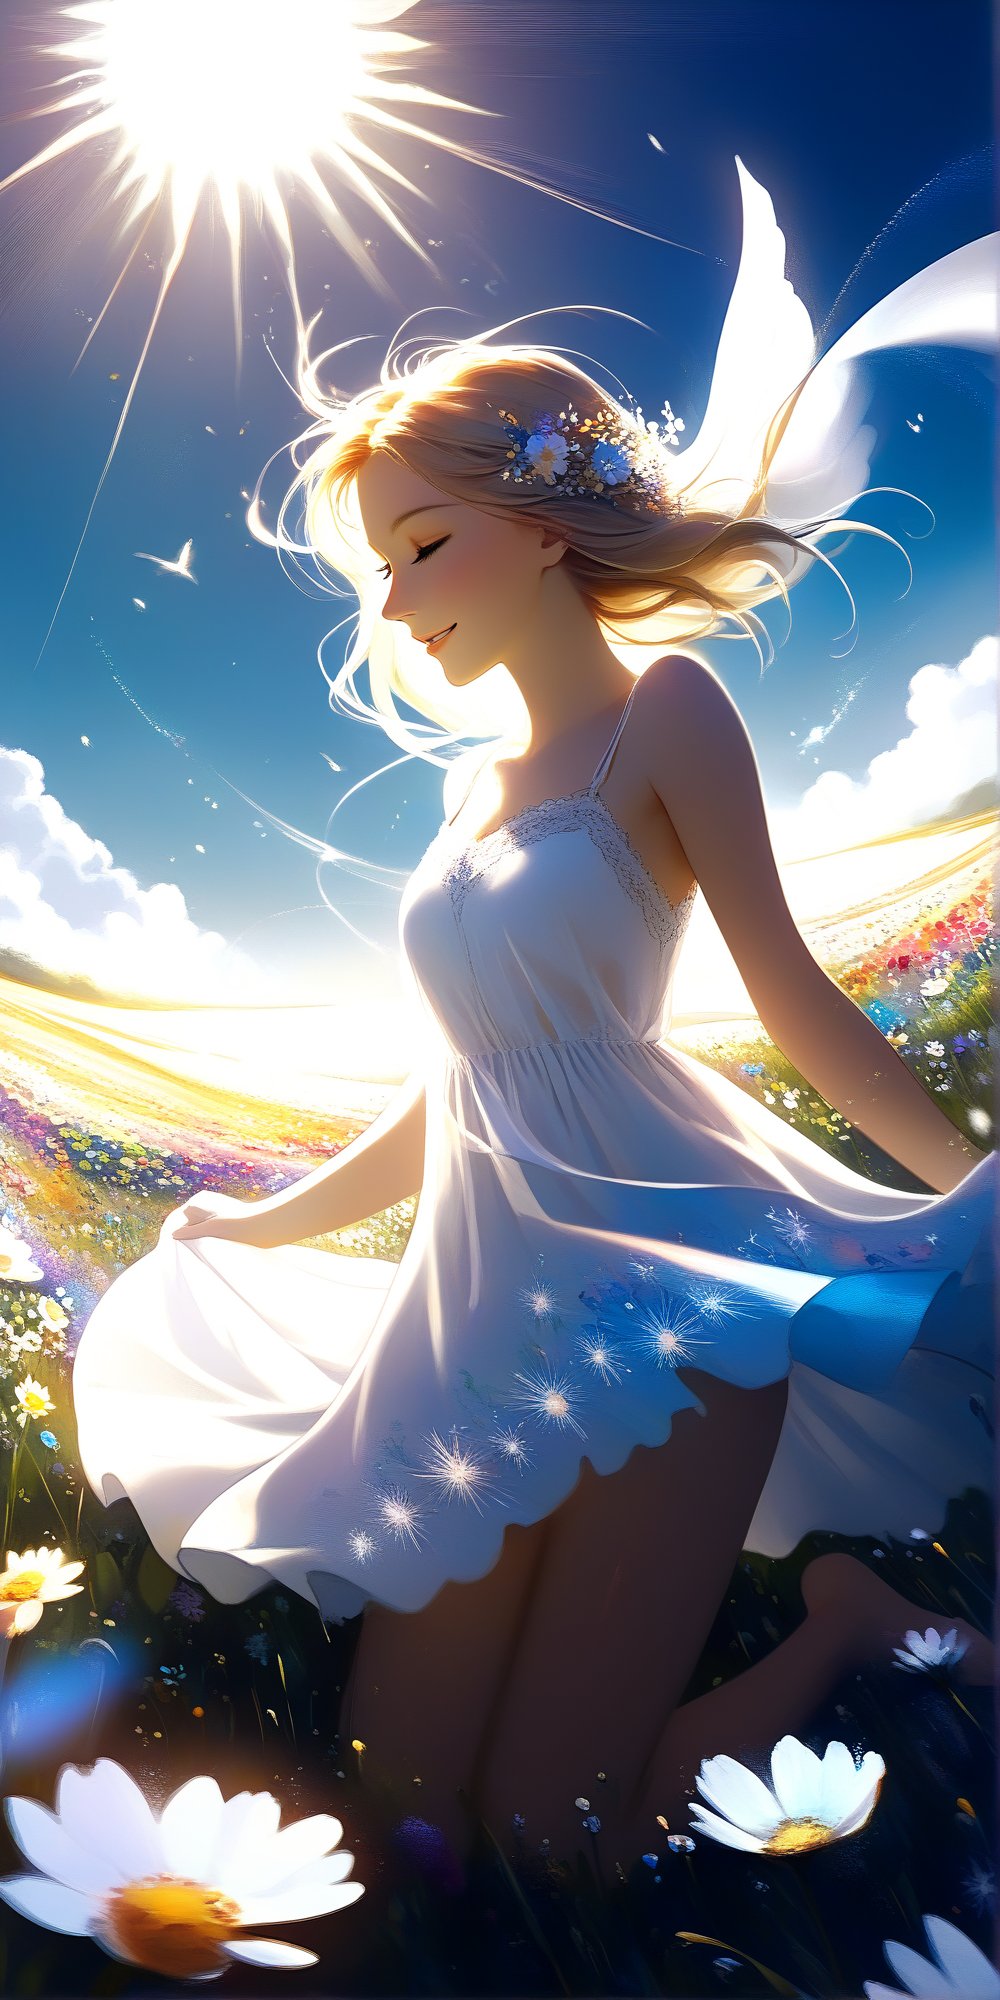 A vibrant, dreamlike scene: A young woman's radiant smile illuminates her entire face as she twirls barefoot in a lush, sun-kissed flower meadow. Her short white mini dress flutters around her knees, while a sea of colorful blooms sways gently in the warm summer breeze. The bright sunlight casts a warm glow on her skin, as if infused with the magic of the surrounding wildflowers.